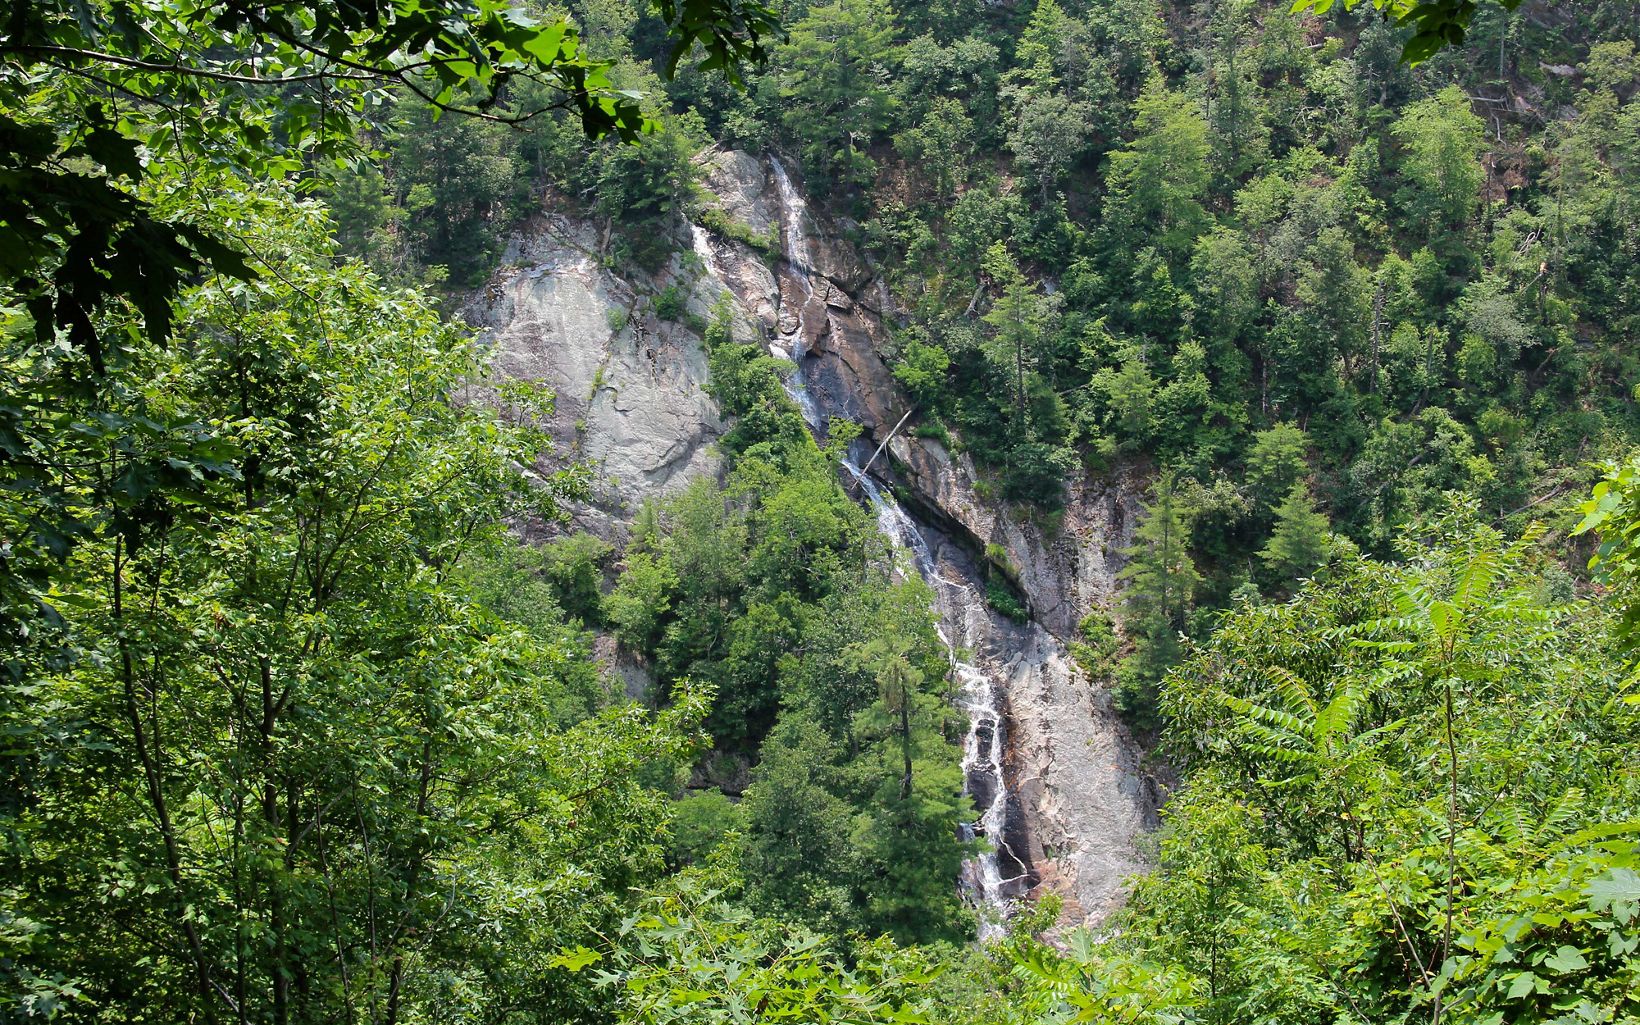 A thin stream of water cascades down the bare rock face of a waterfall. Leafy trees and vegetation grow from the side of the mountain.